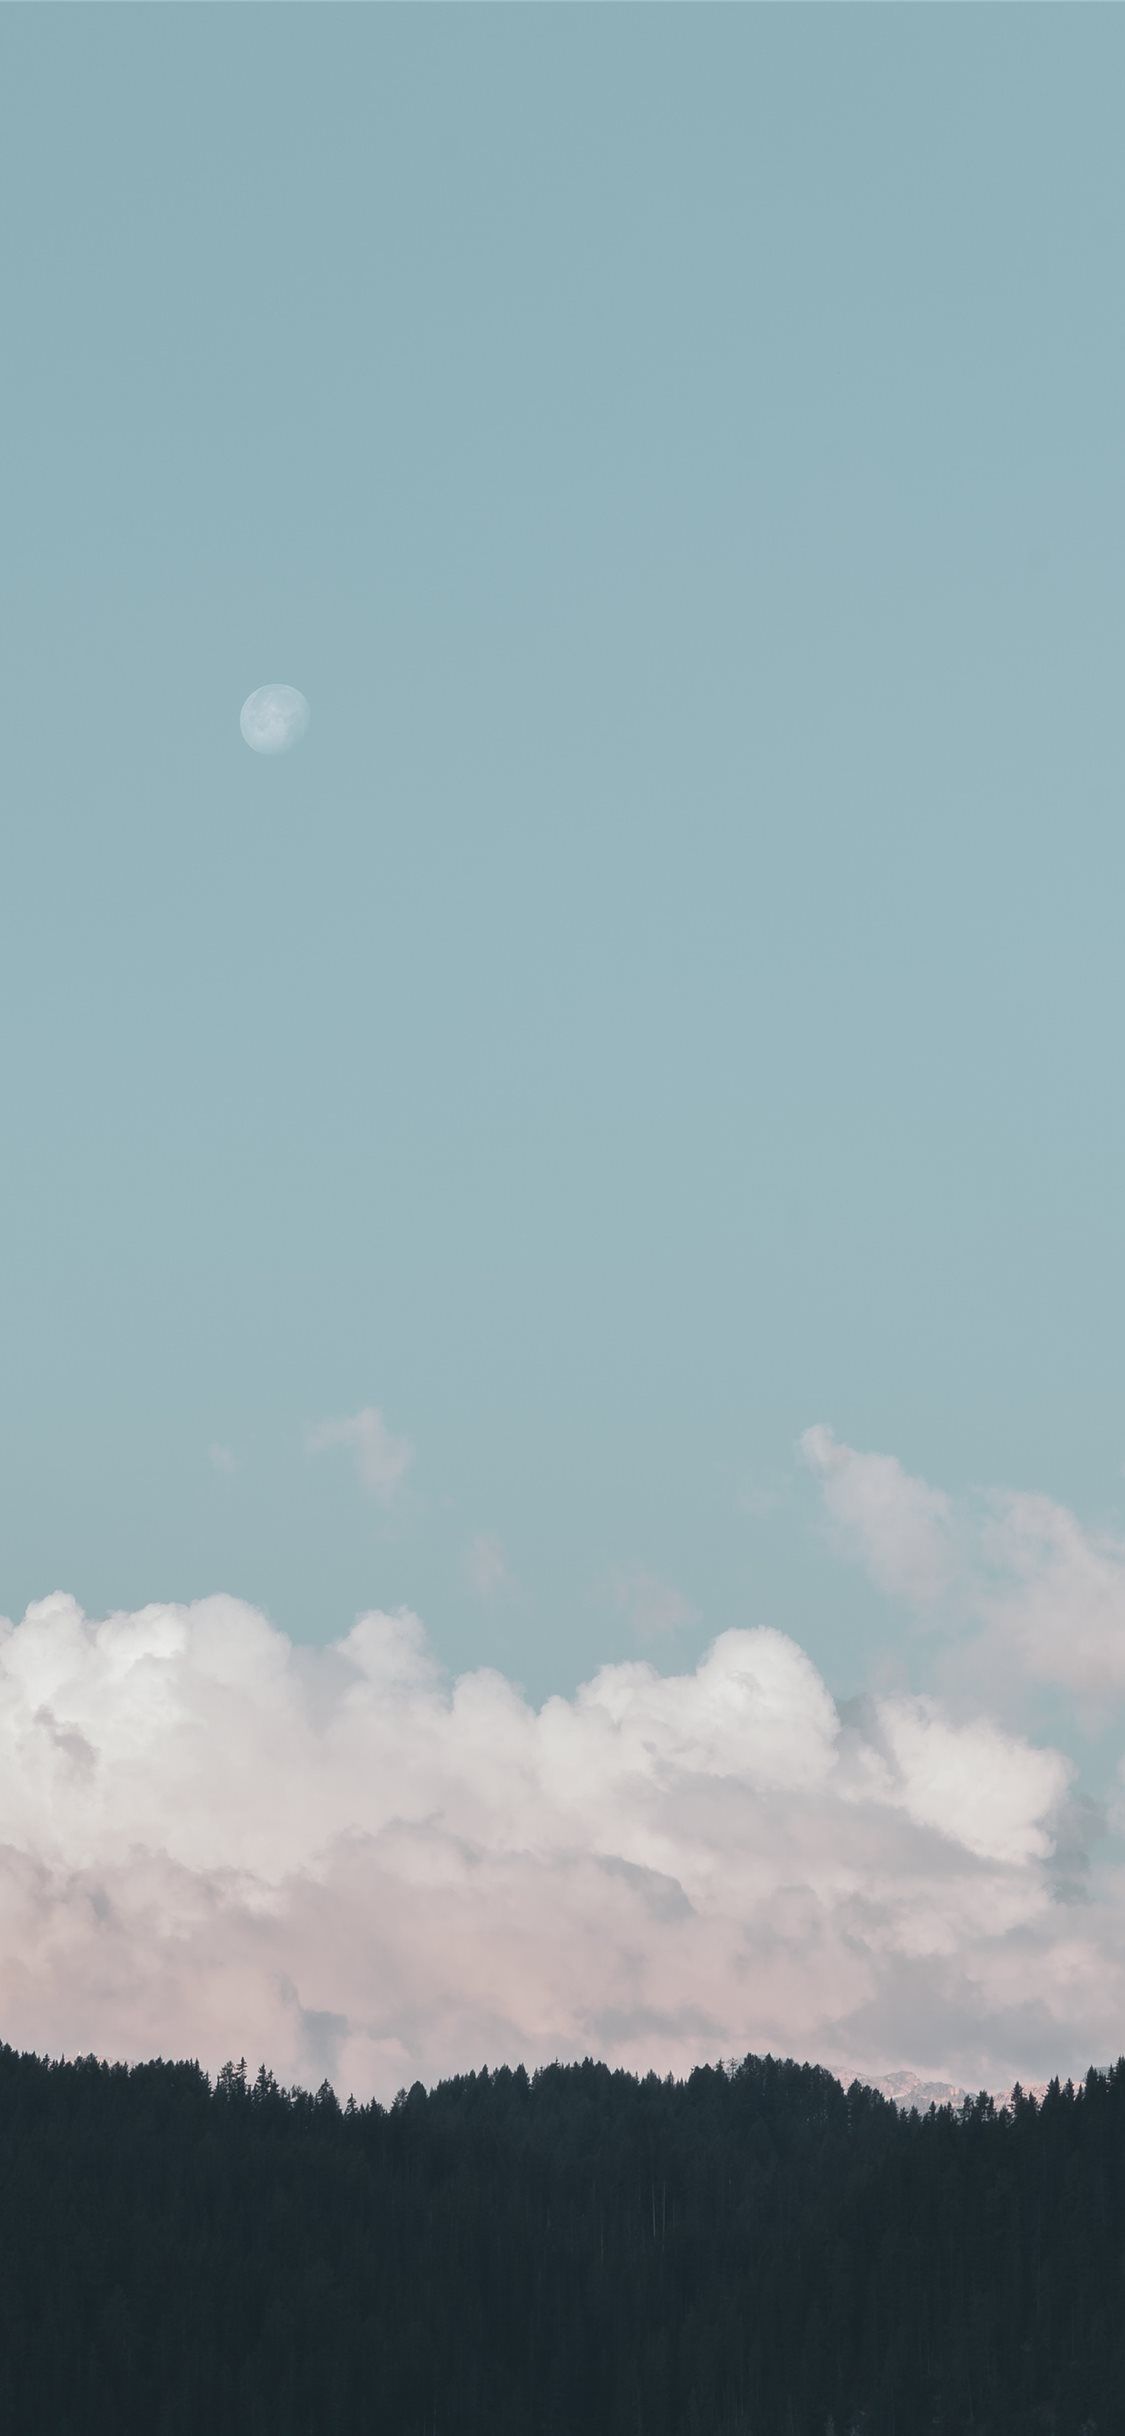 Pastel clouds #LaVal #italy #forest #mountian #moon #cloud #sky #iPhone11Wallpaper. Clouds wallpaper iphone, iPhone wallpaper sky, HD wallpaper iphone